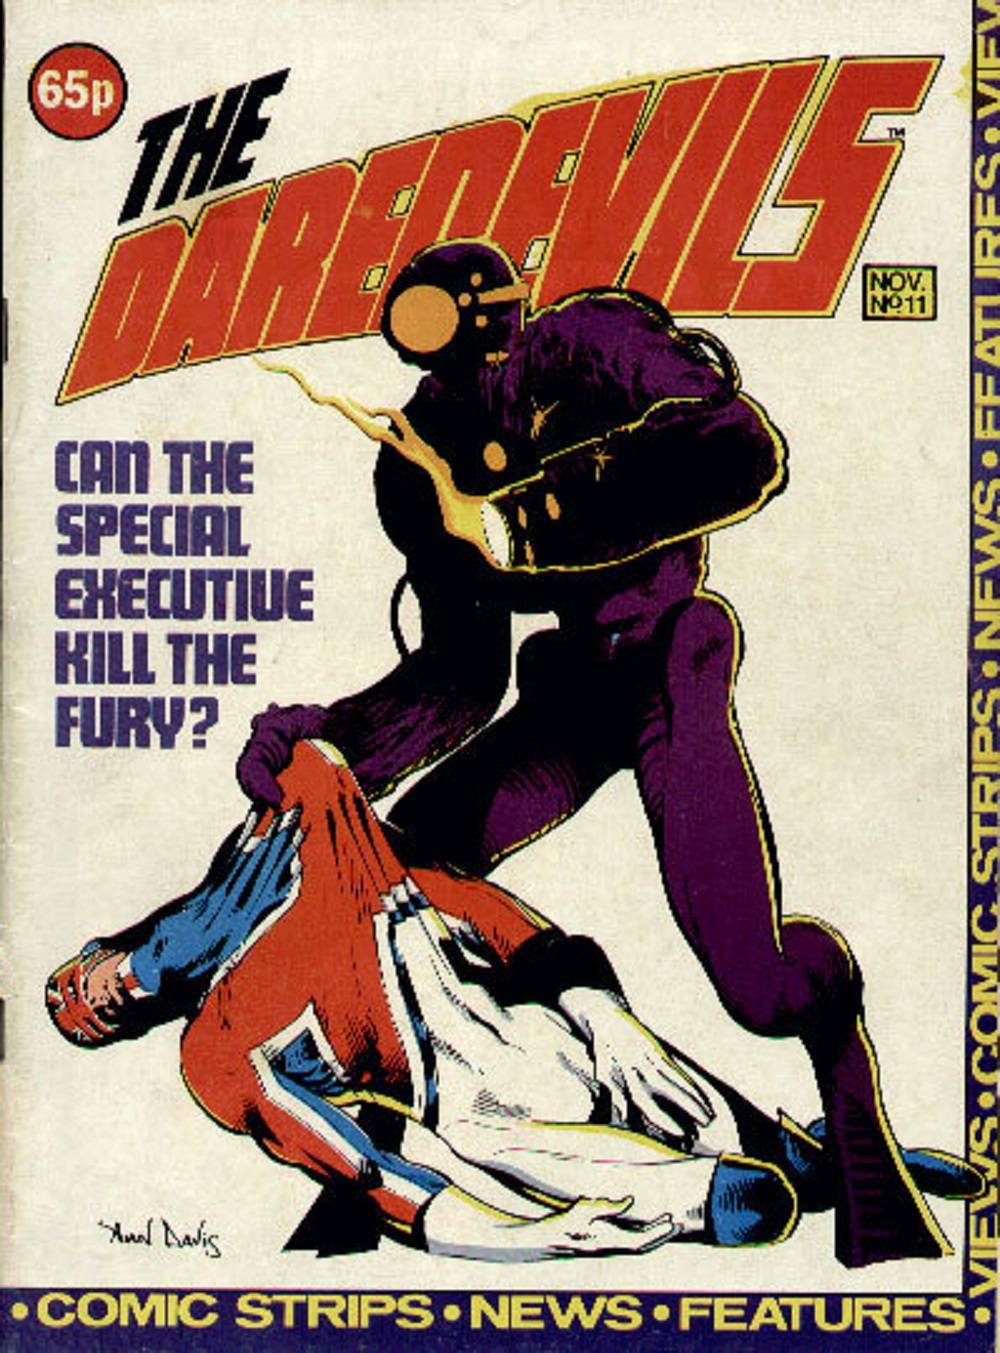 The-Daredevils-11-cover.jpg?q=50&fit=crop&dpr=1.5&profile=RESIZE_710x